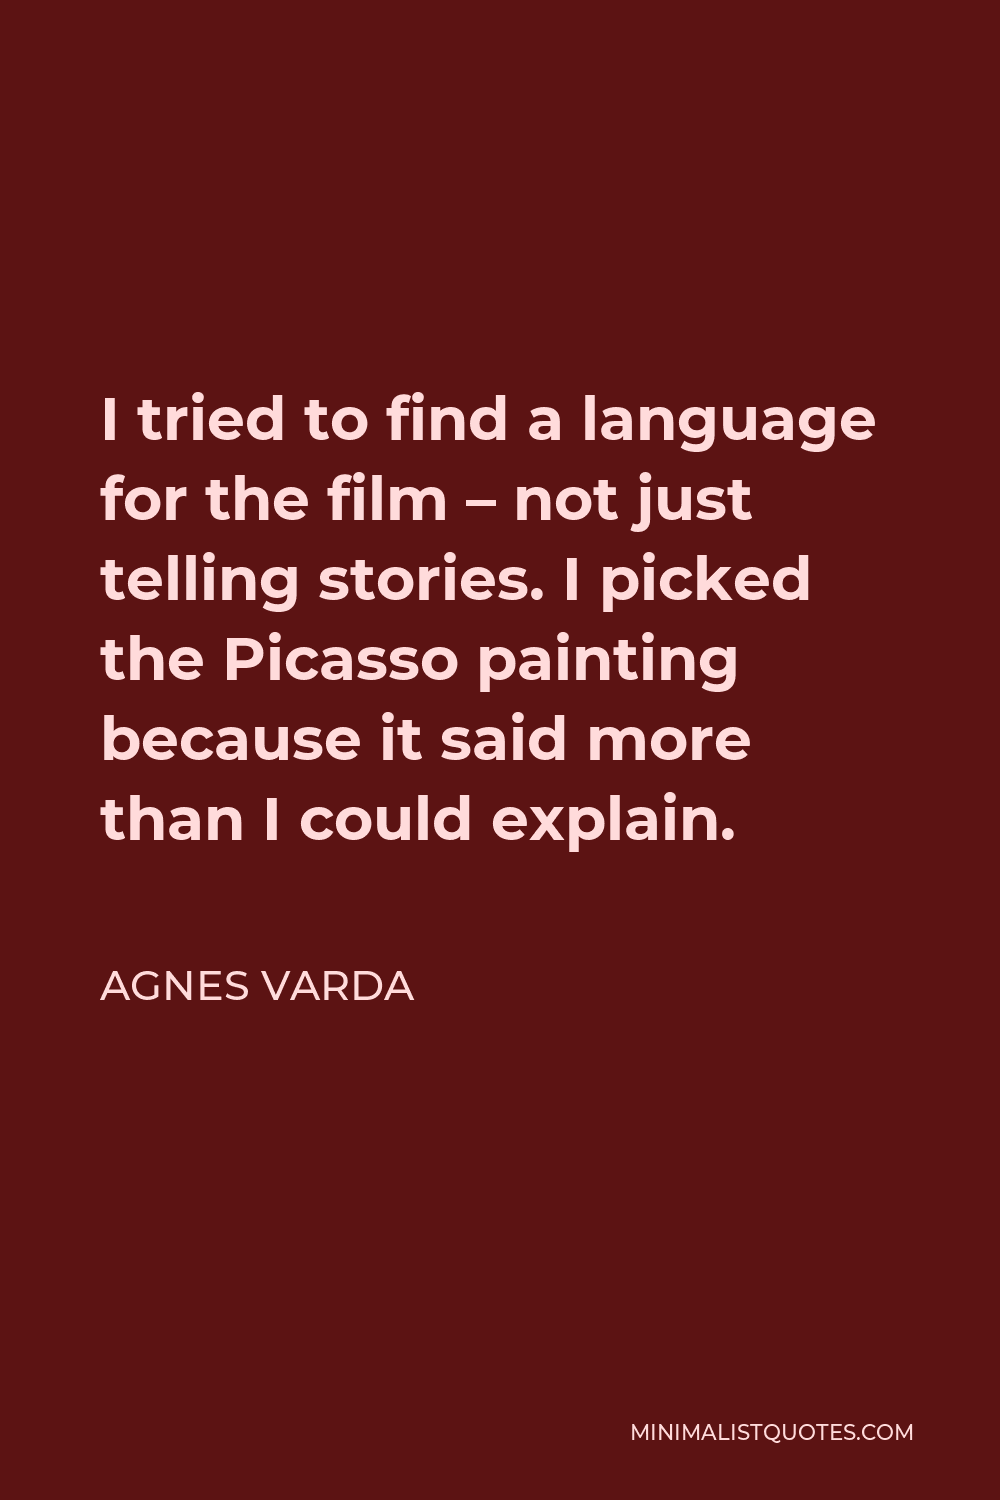 Agnes Varda Quote - I tried to find a language for the film – not just telling stories. I picked the Picasso painting because it said more than I could explain.